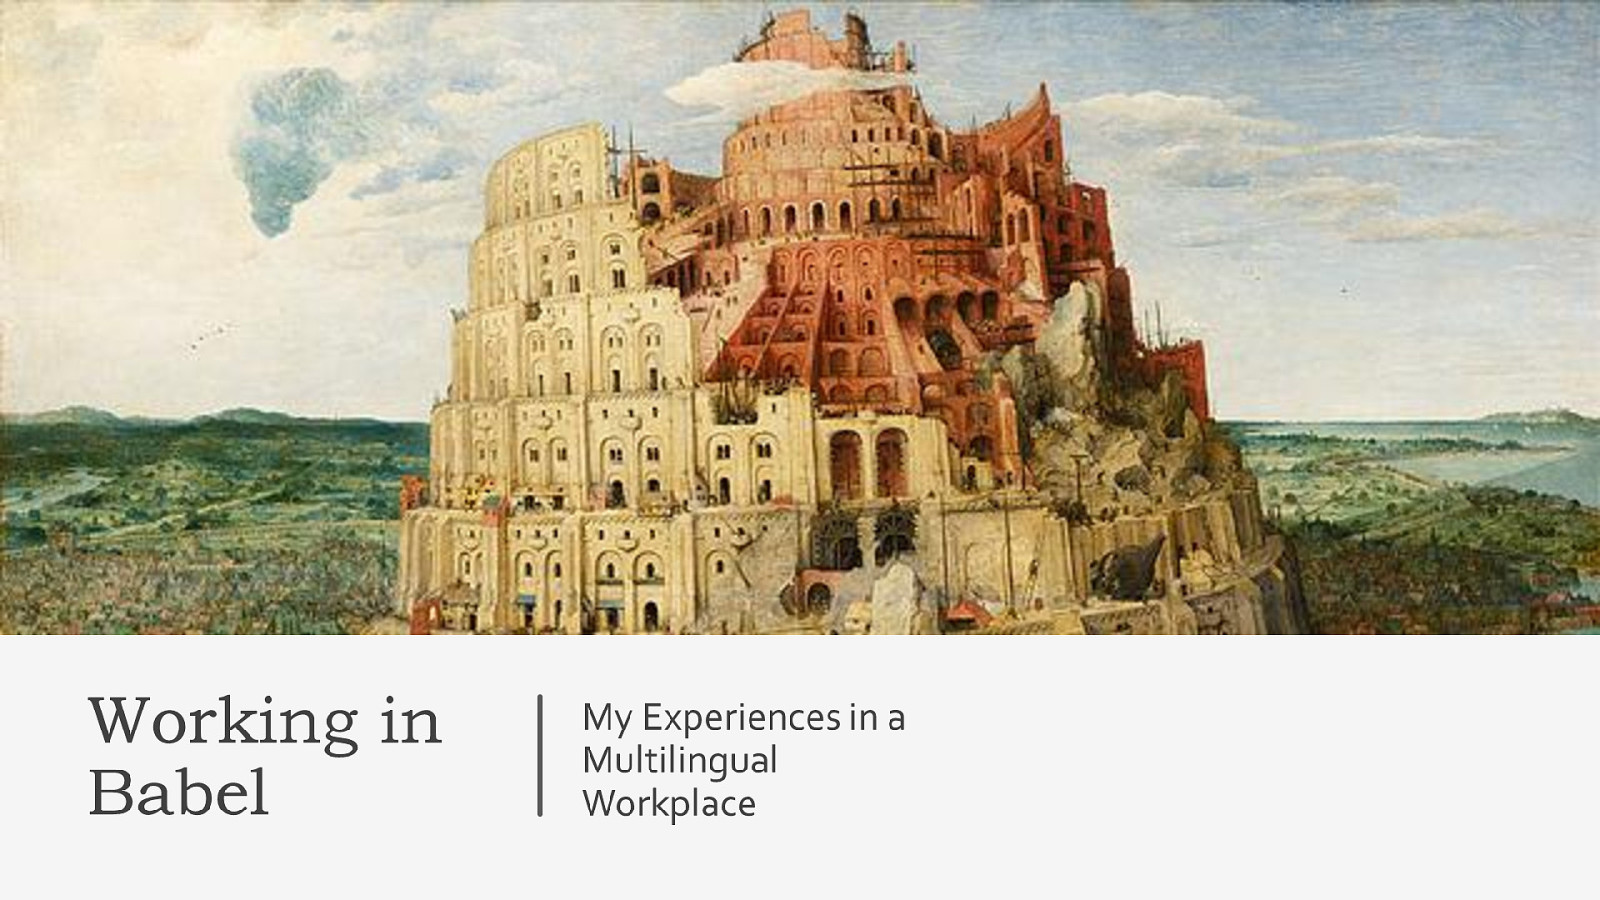 Working in Babel: My Experiences in a Multilingual Workplace